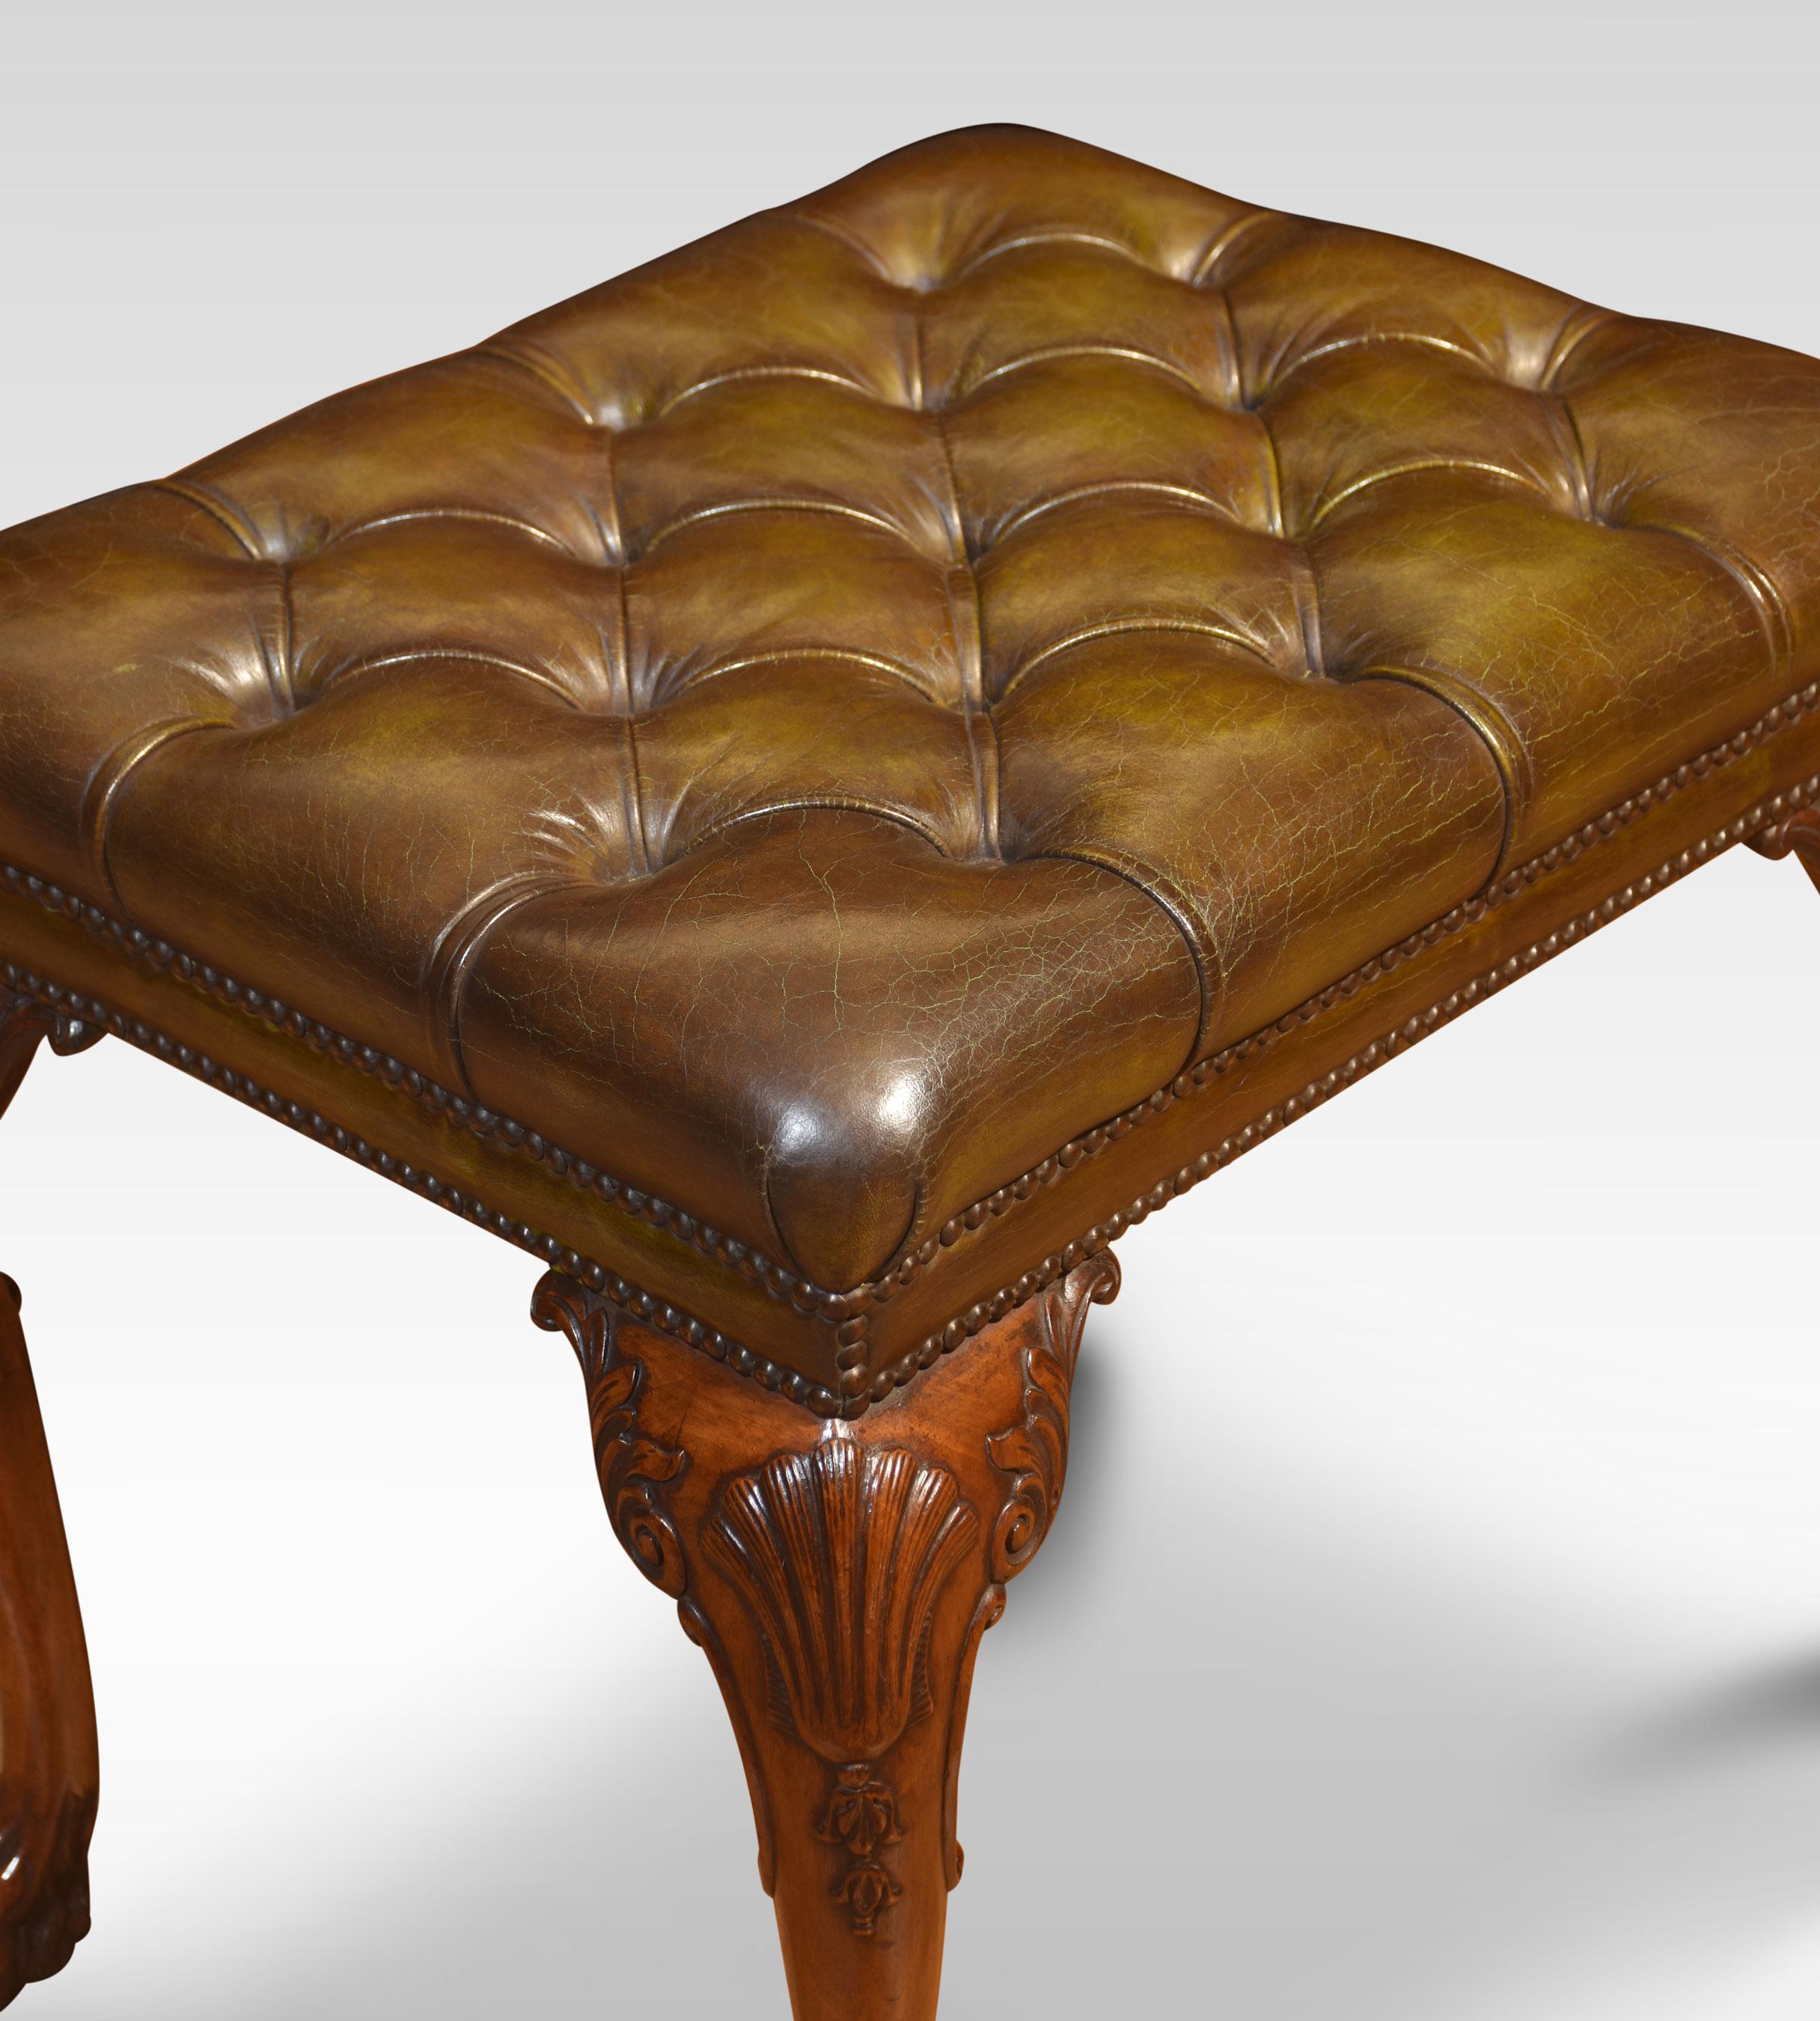 Carved stool, the rectangular upholstered leather deep buttoned seat raised up on four carved cabriole legs terminating in paw feet. The leather has been replaced and hand-dyed.
Dimensions
Height 23 Inches
Width 25 Inches
Depth 20 Inches